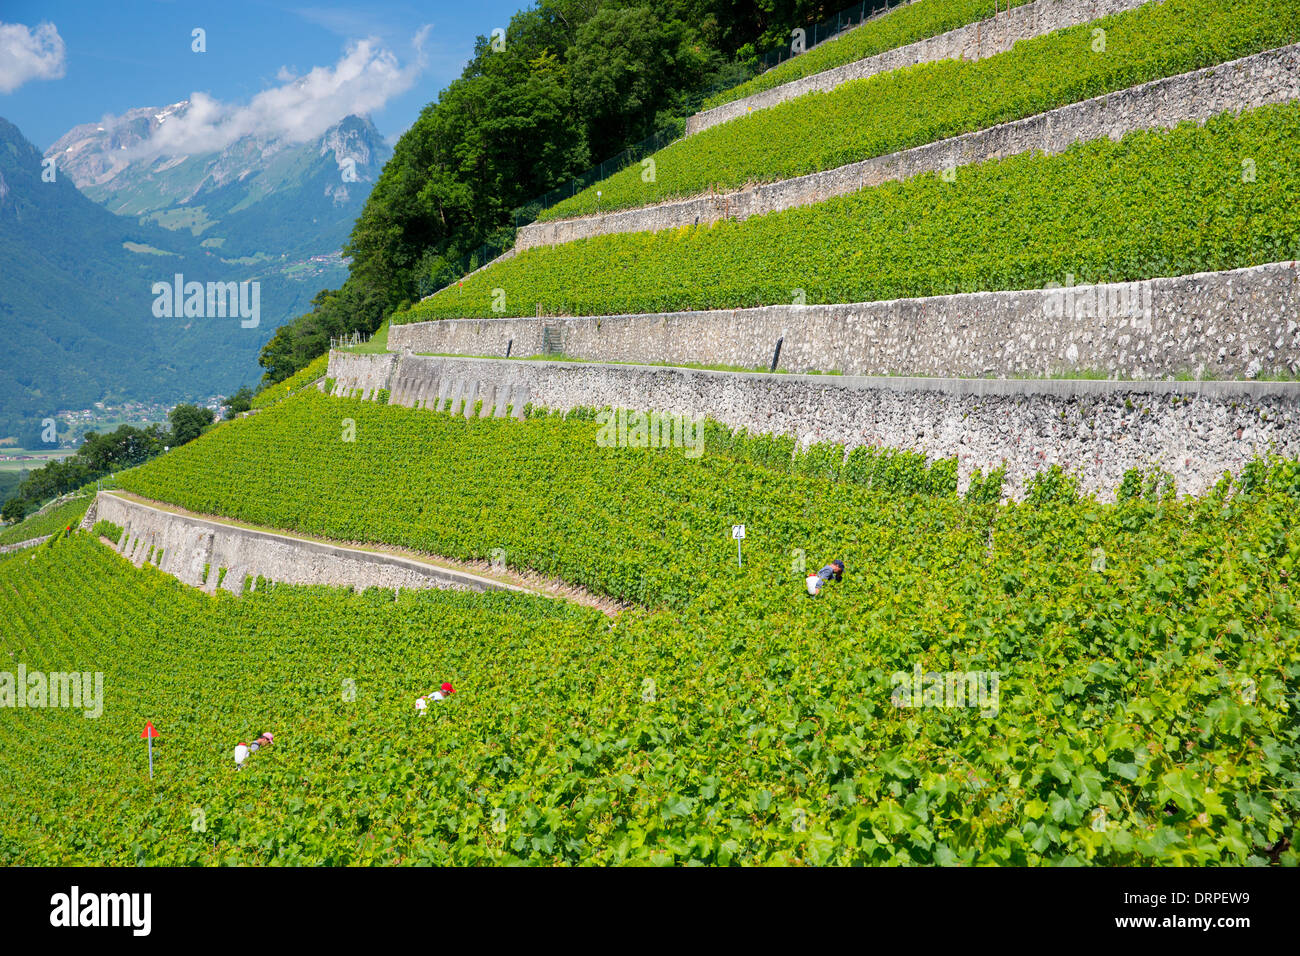 Workers spraying Chablais vines at wine estate, Clos du Rocher, at Yvorne in the Chablais region of Switzerland Stock Photo